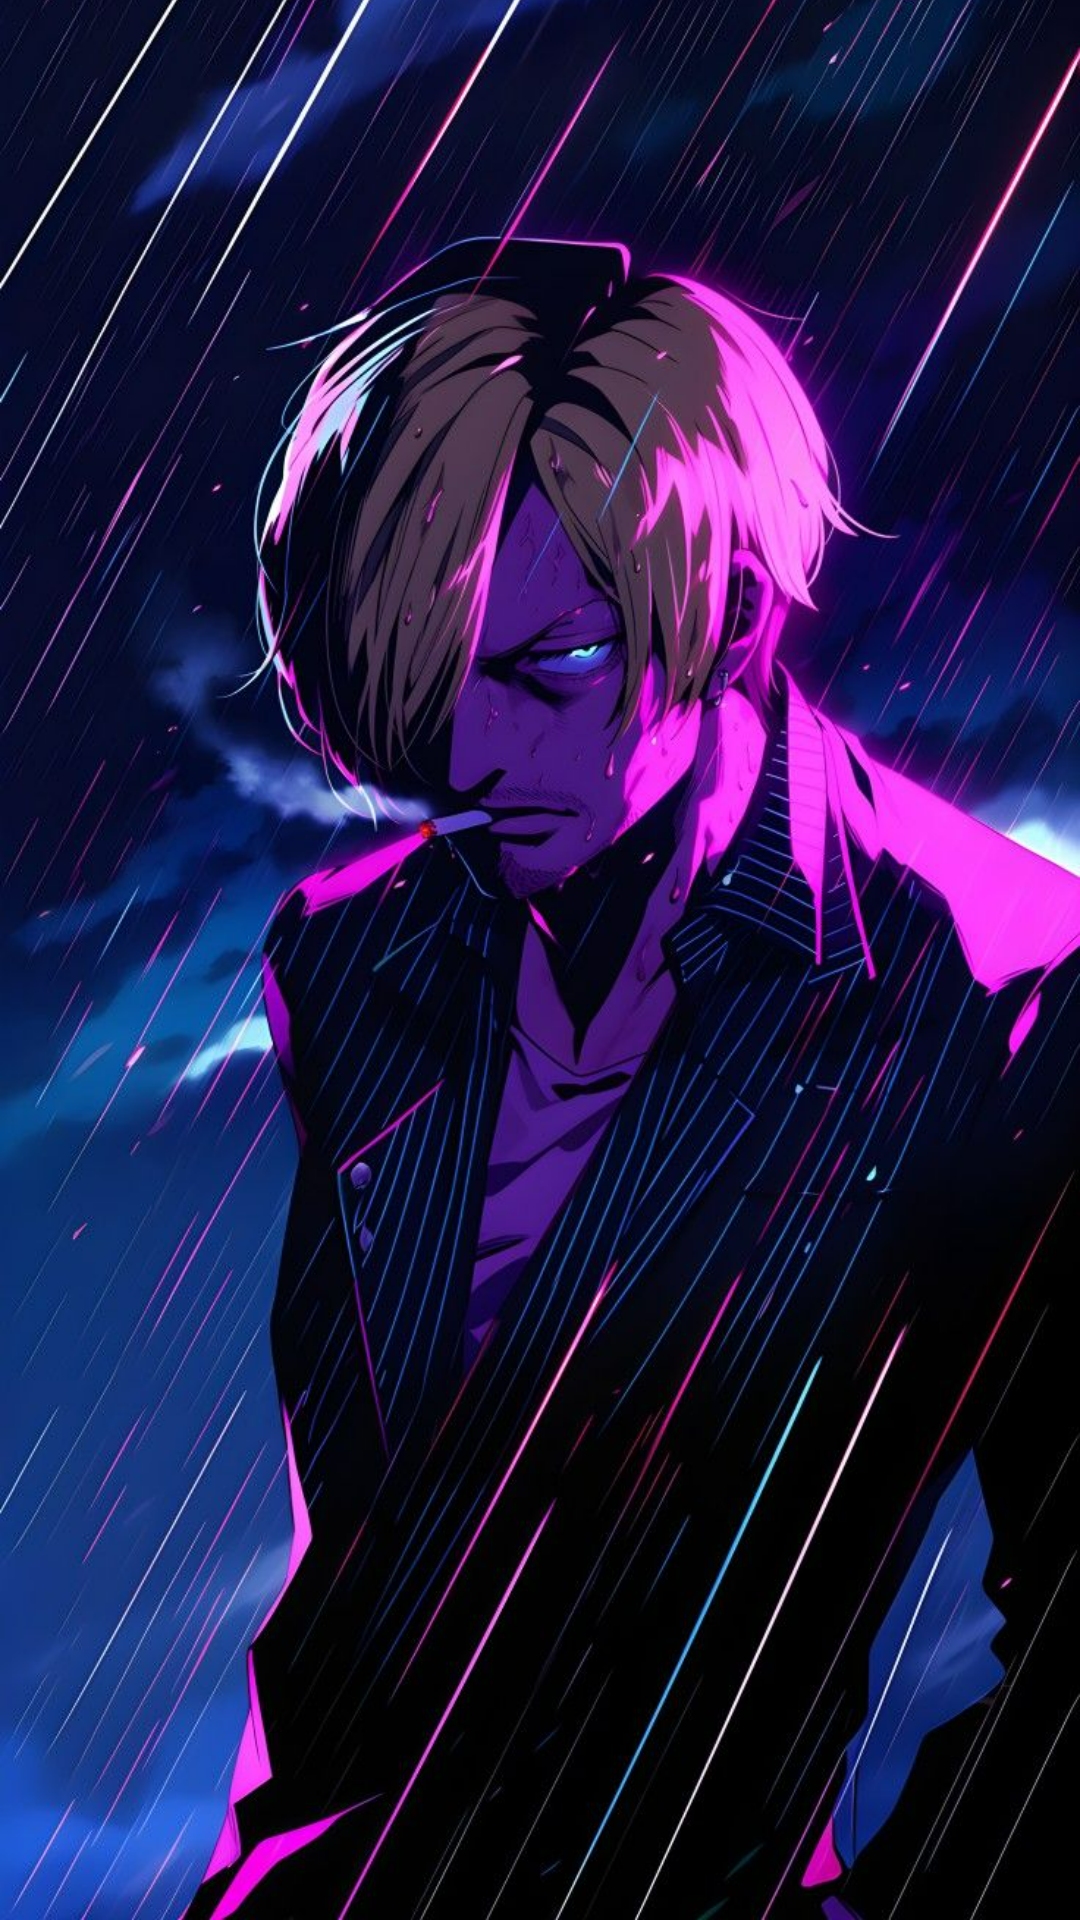 Sanji Pictures